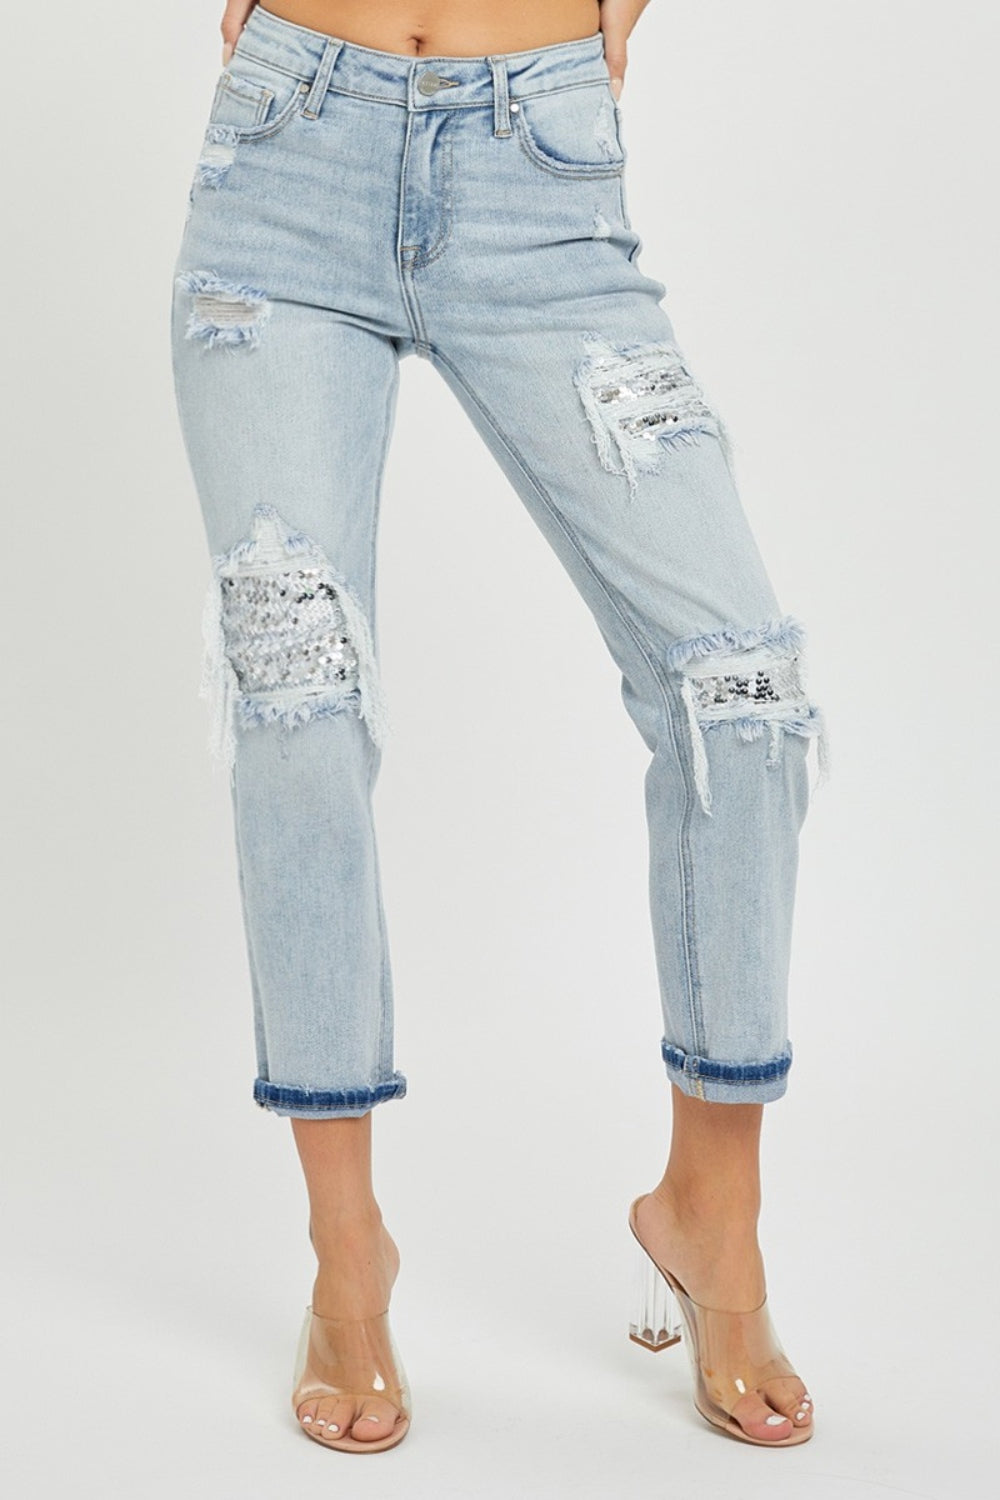 RISEN Mid-Rise Sequin Patched Jeans Southern Soul Collectives